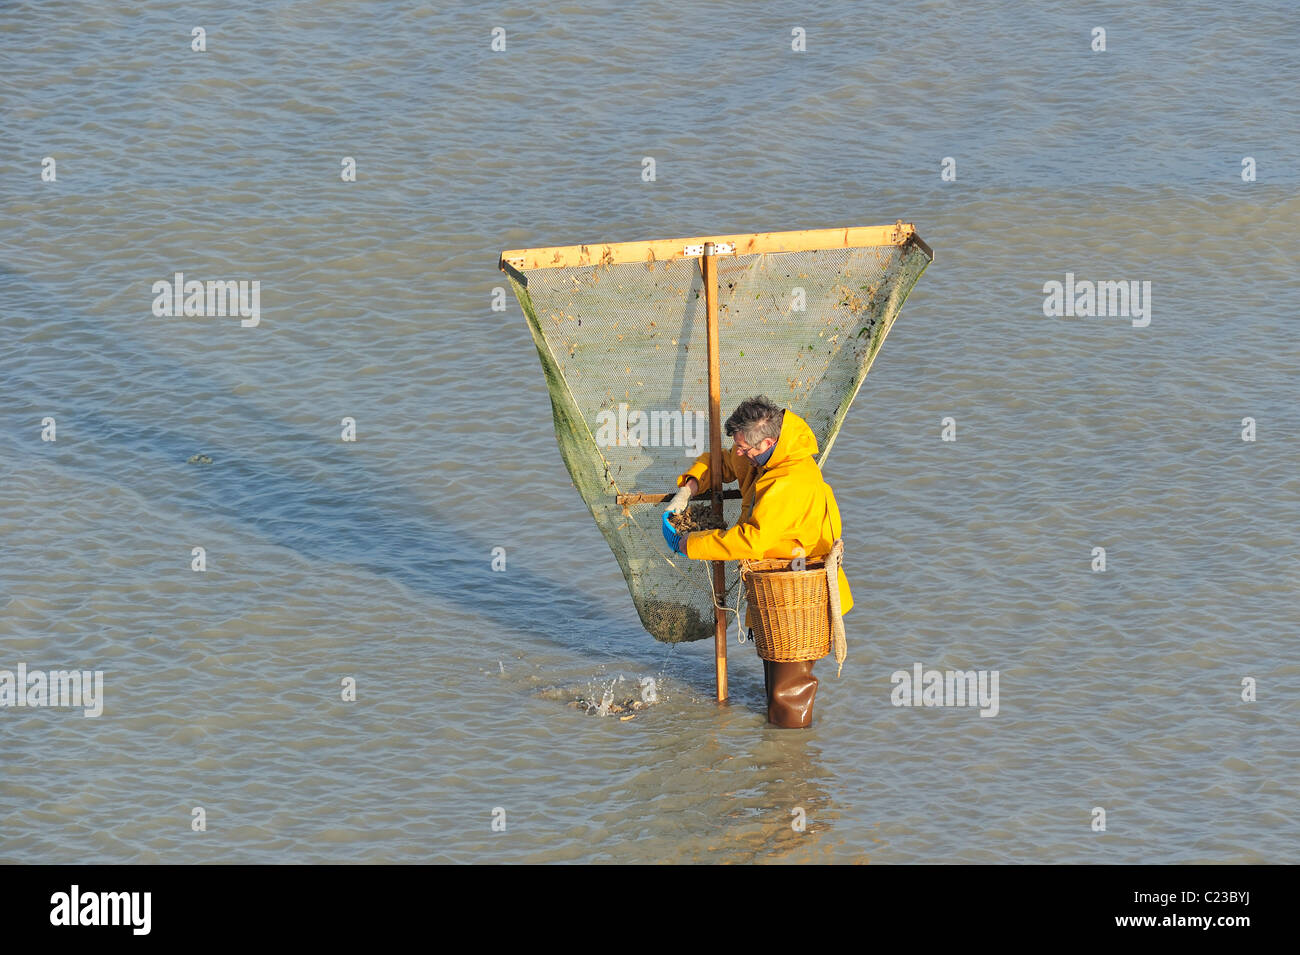 https://c8.alamy.com/comp/C23BYJ/shrimper-fishing-for-shrimps-with-shrimping-net-along-the-beach-at-C23BYJ.jpg